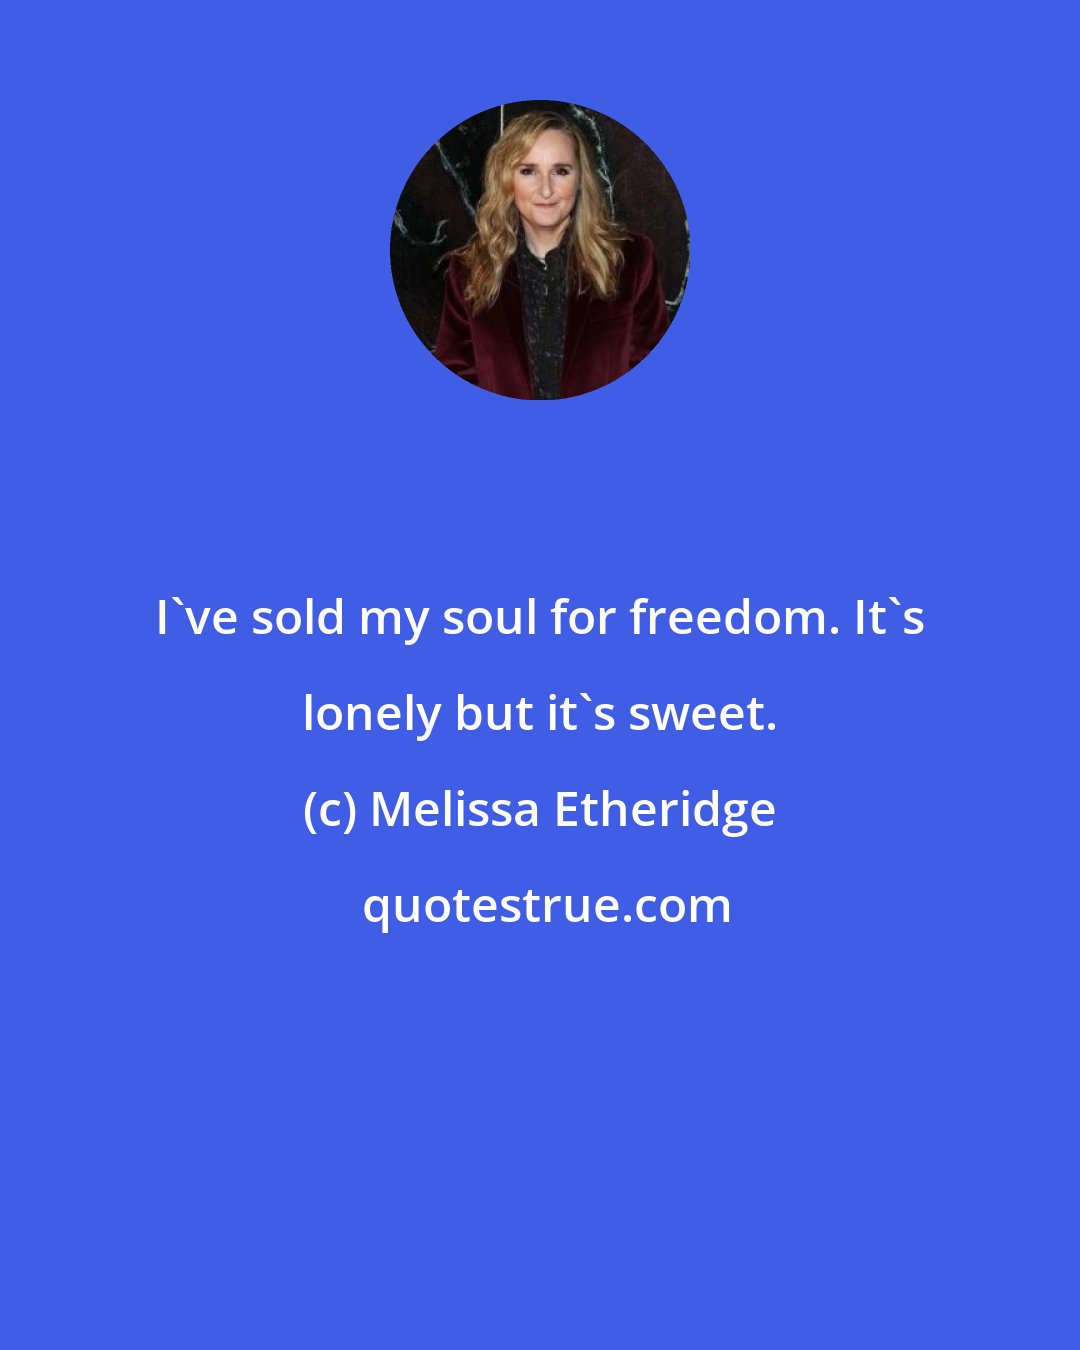 Melissa Etheridge: I've sold my soul for freedom. It's lonely but it's sweet.